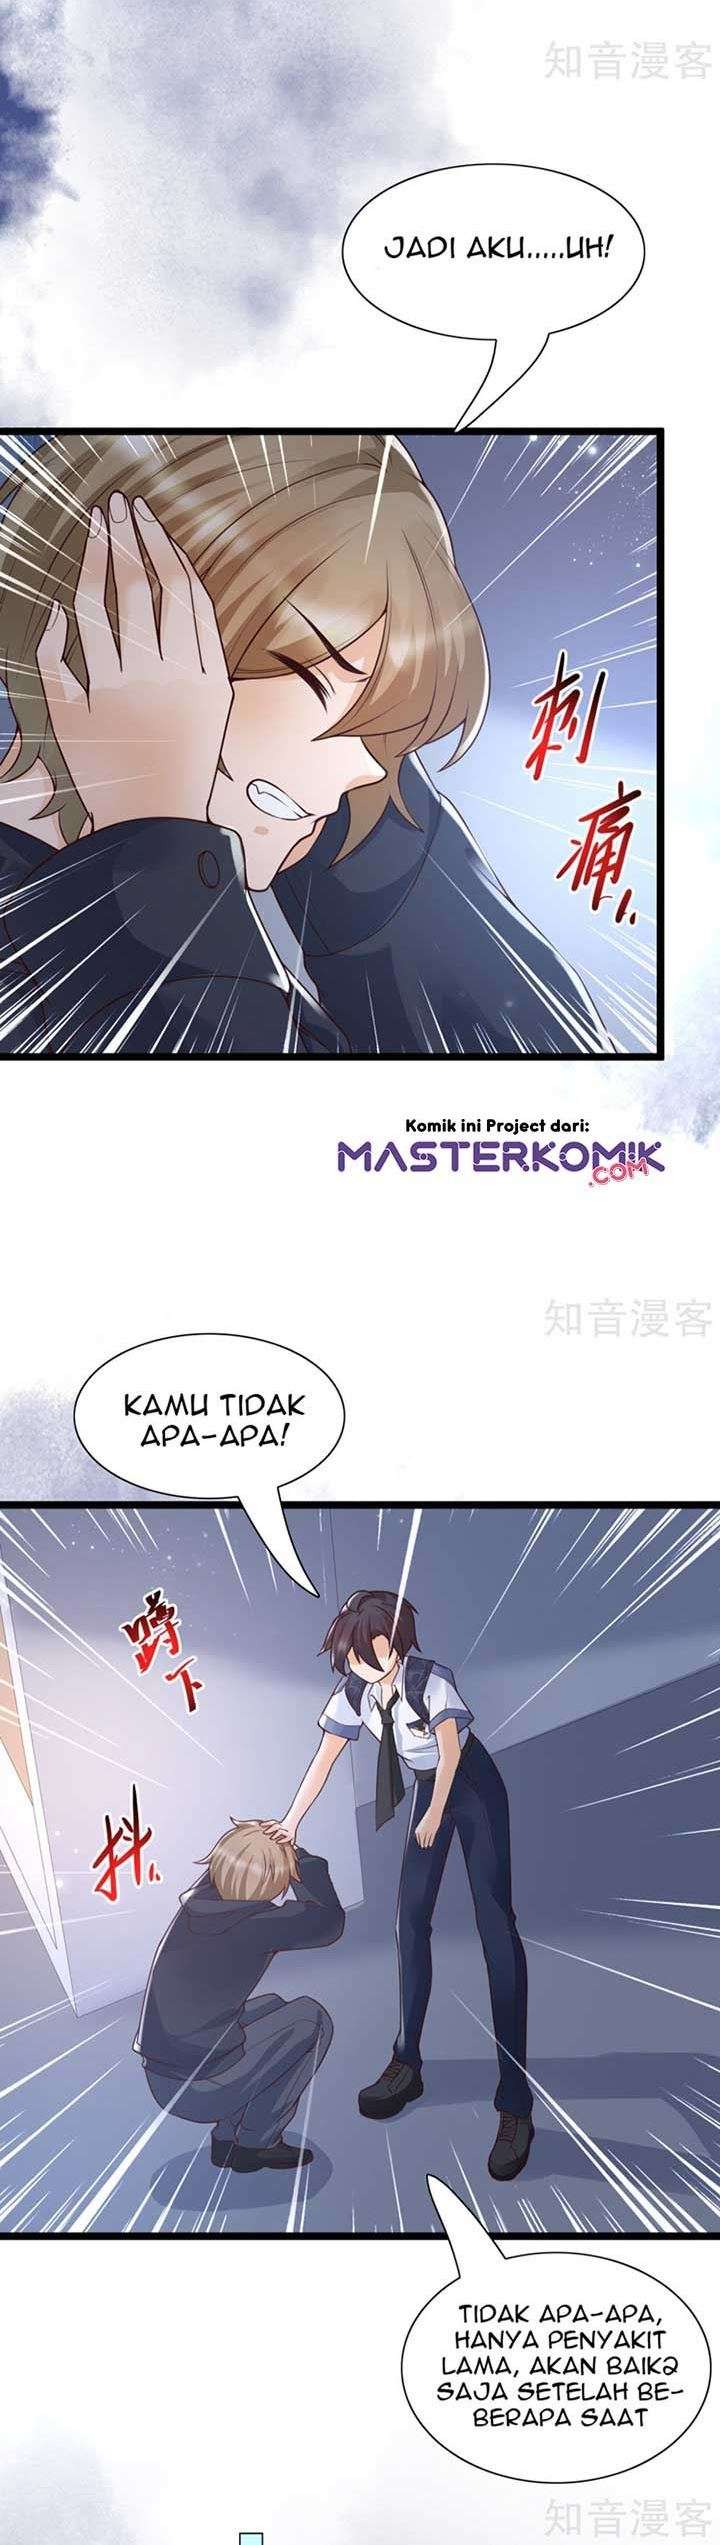 The Goddes Took Me To Be a Master Chapter 22